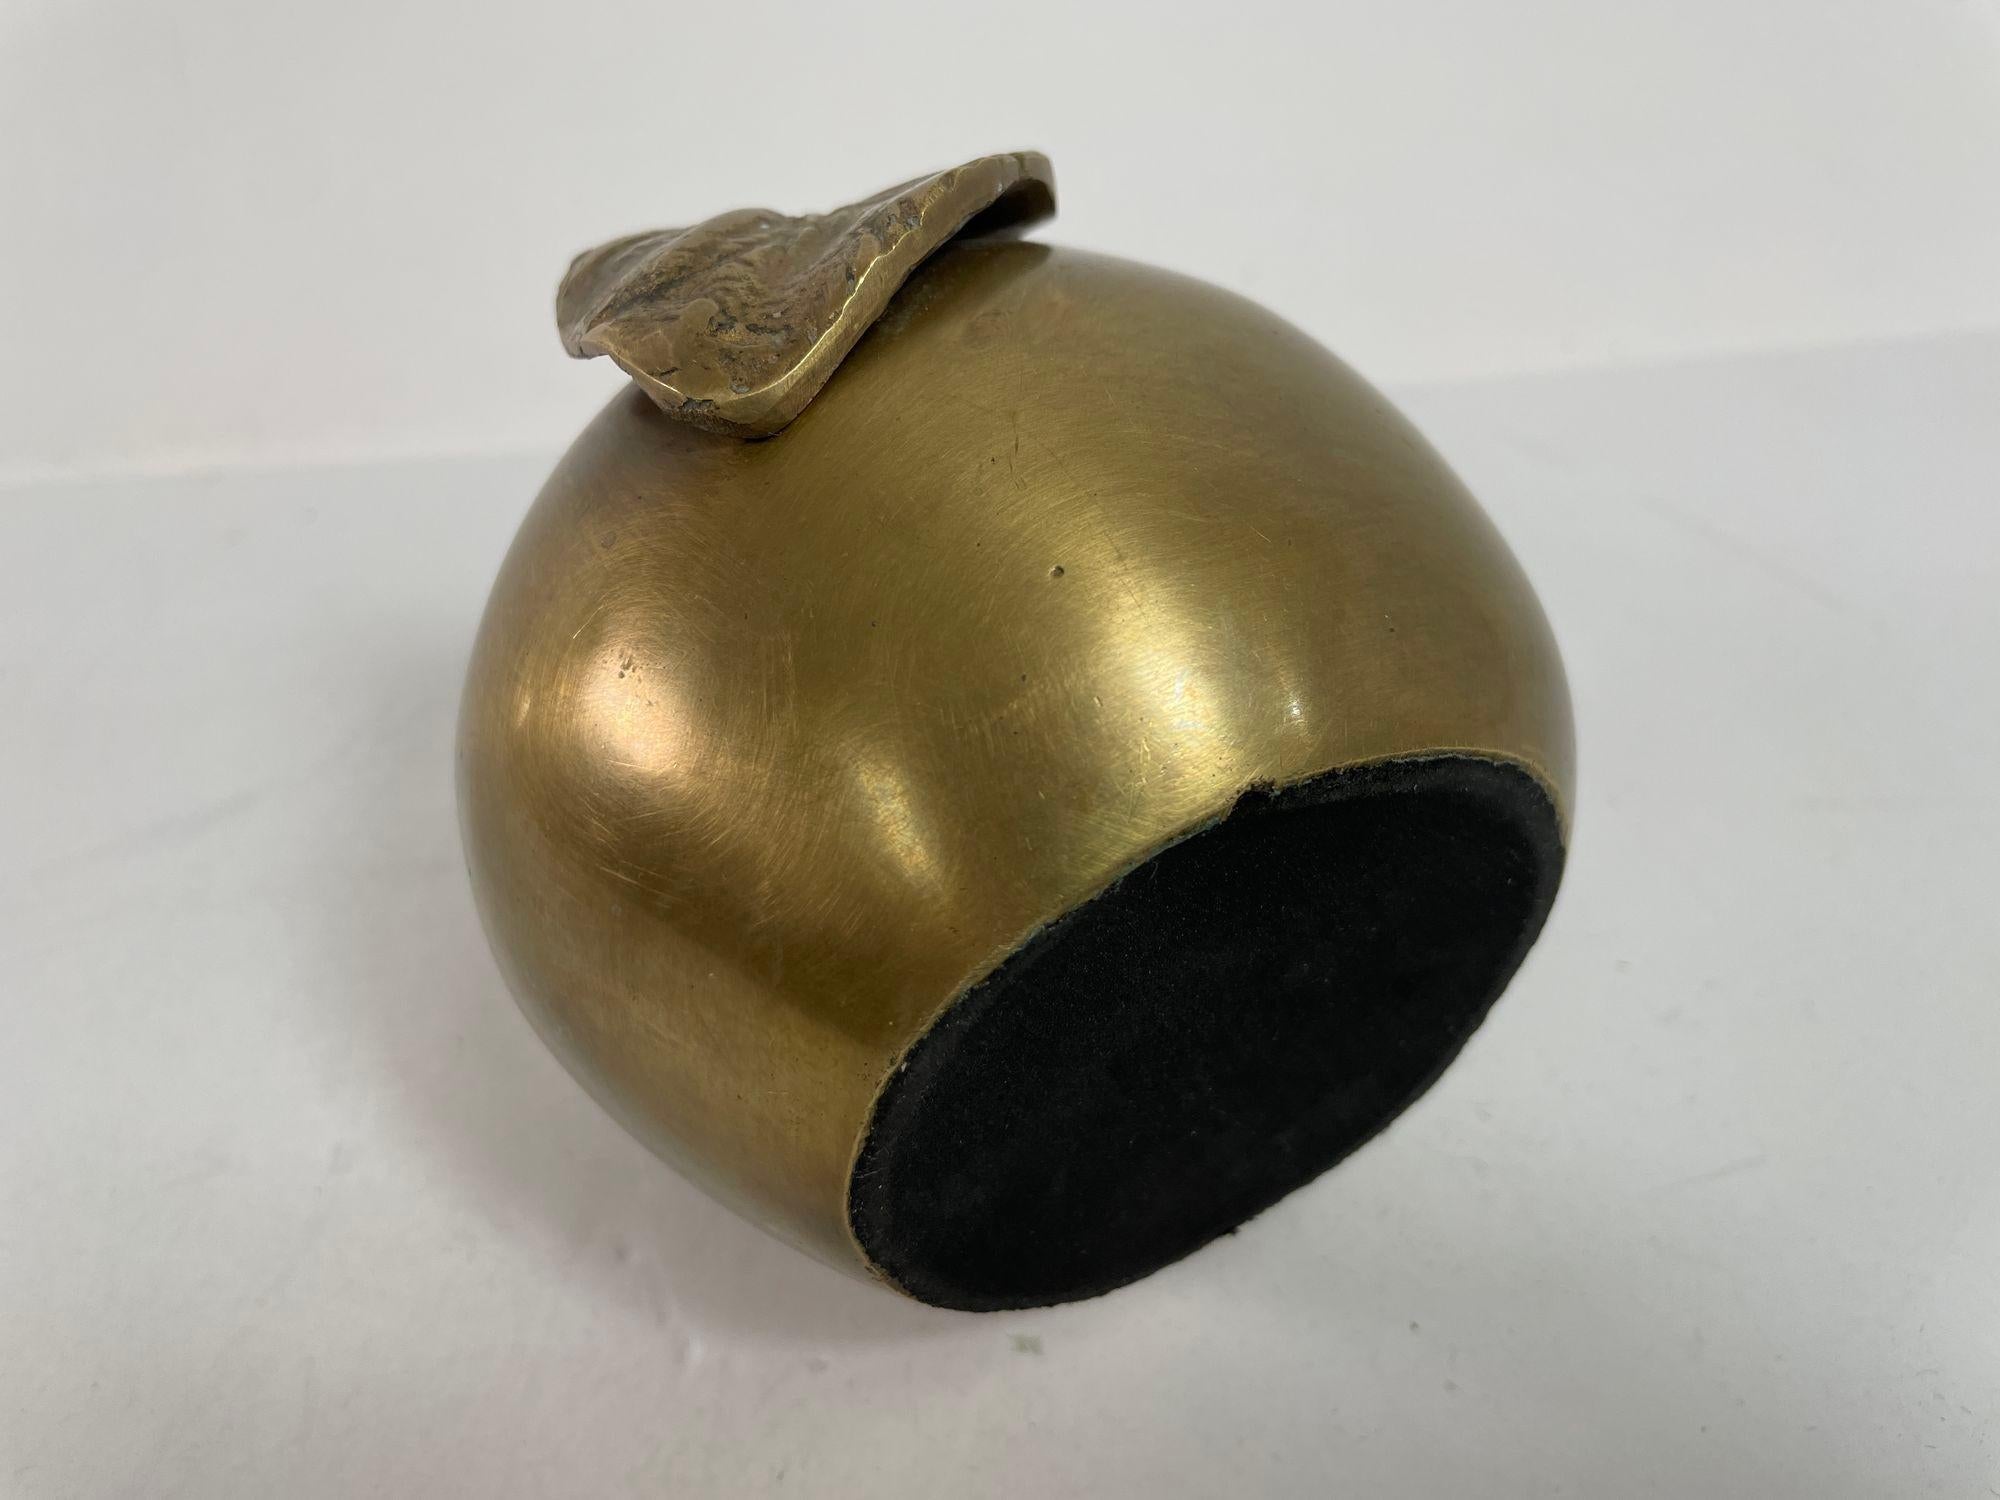 Vintage Brass Apple Sculpture Paperweight For Sale 5